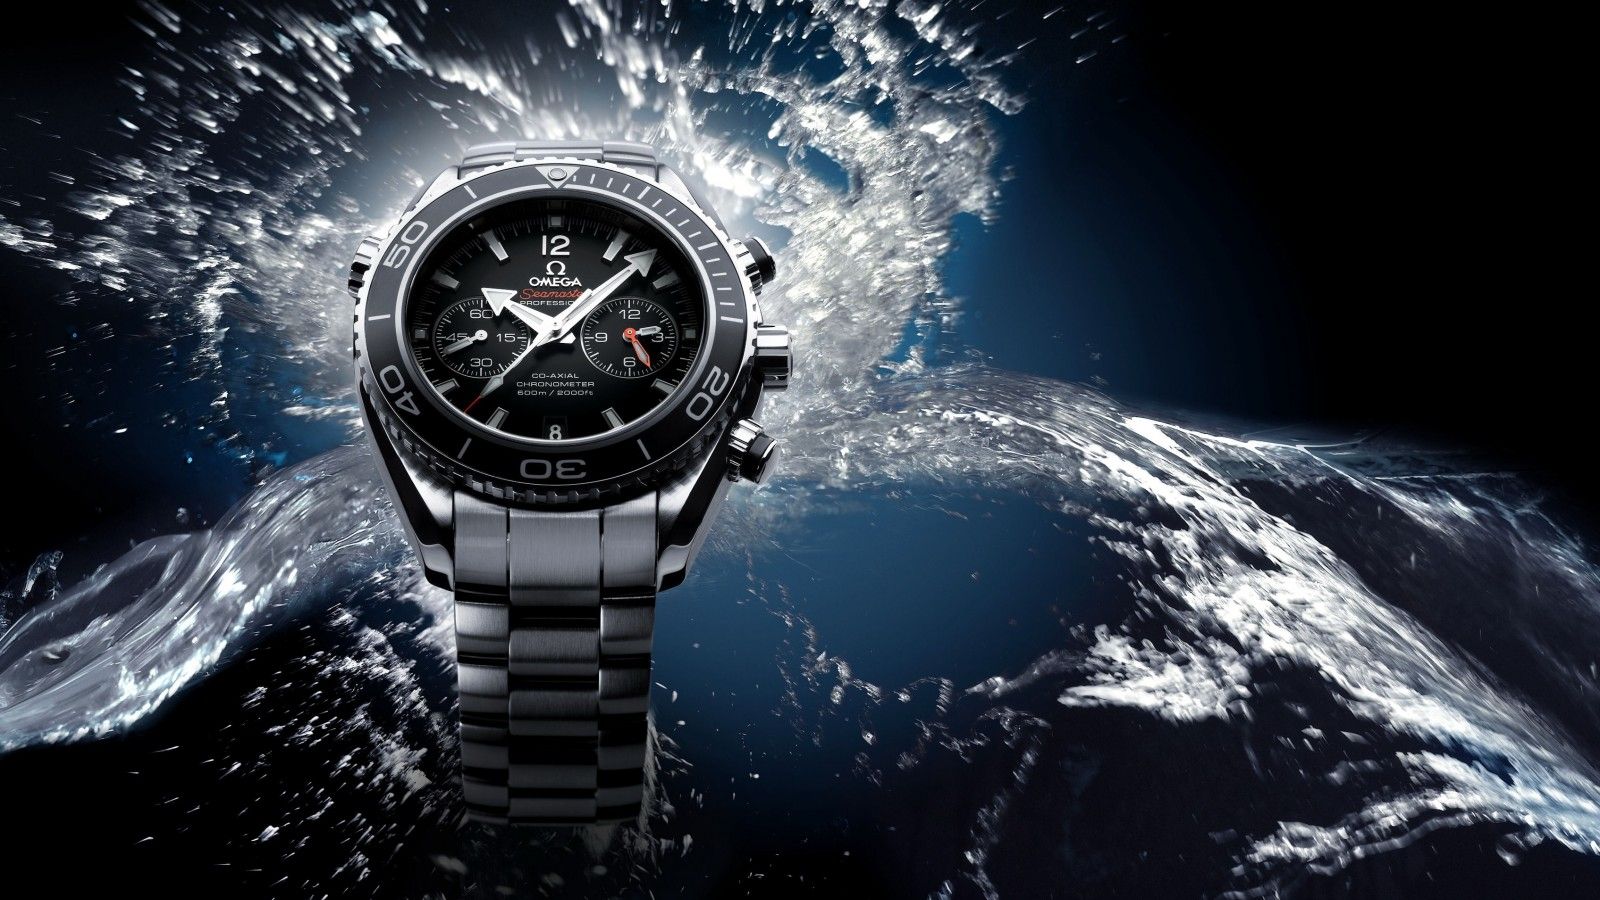 Omega Watches Wallpapers